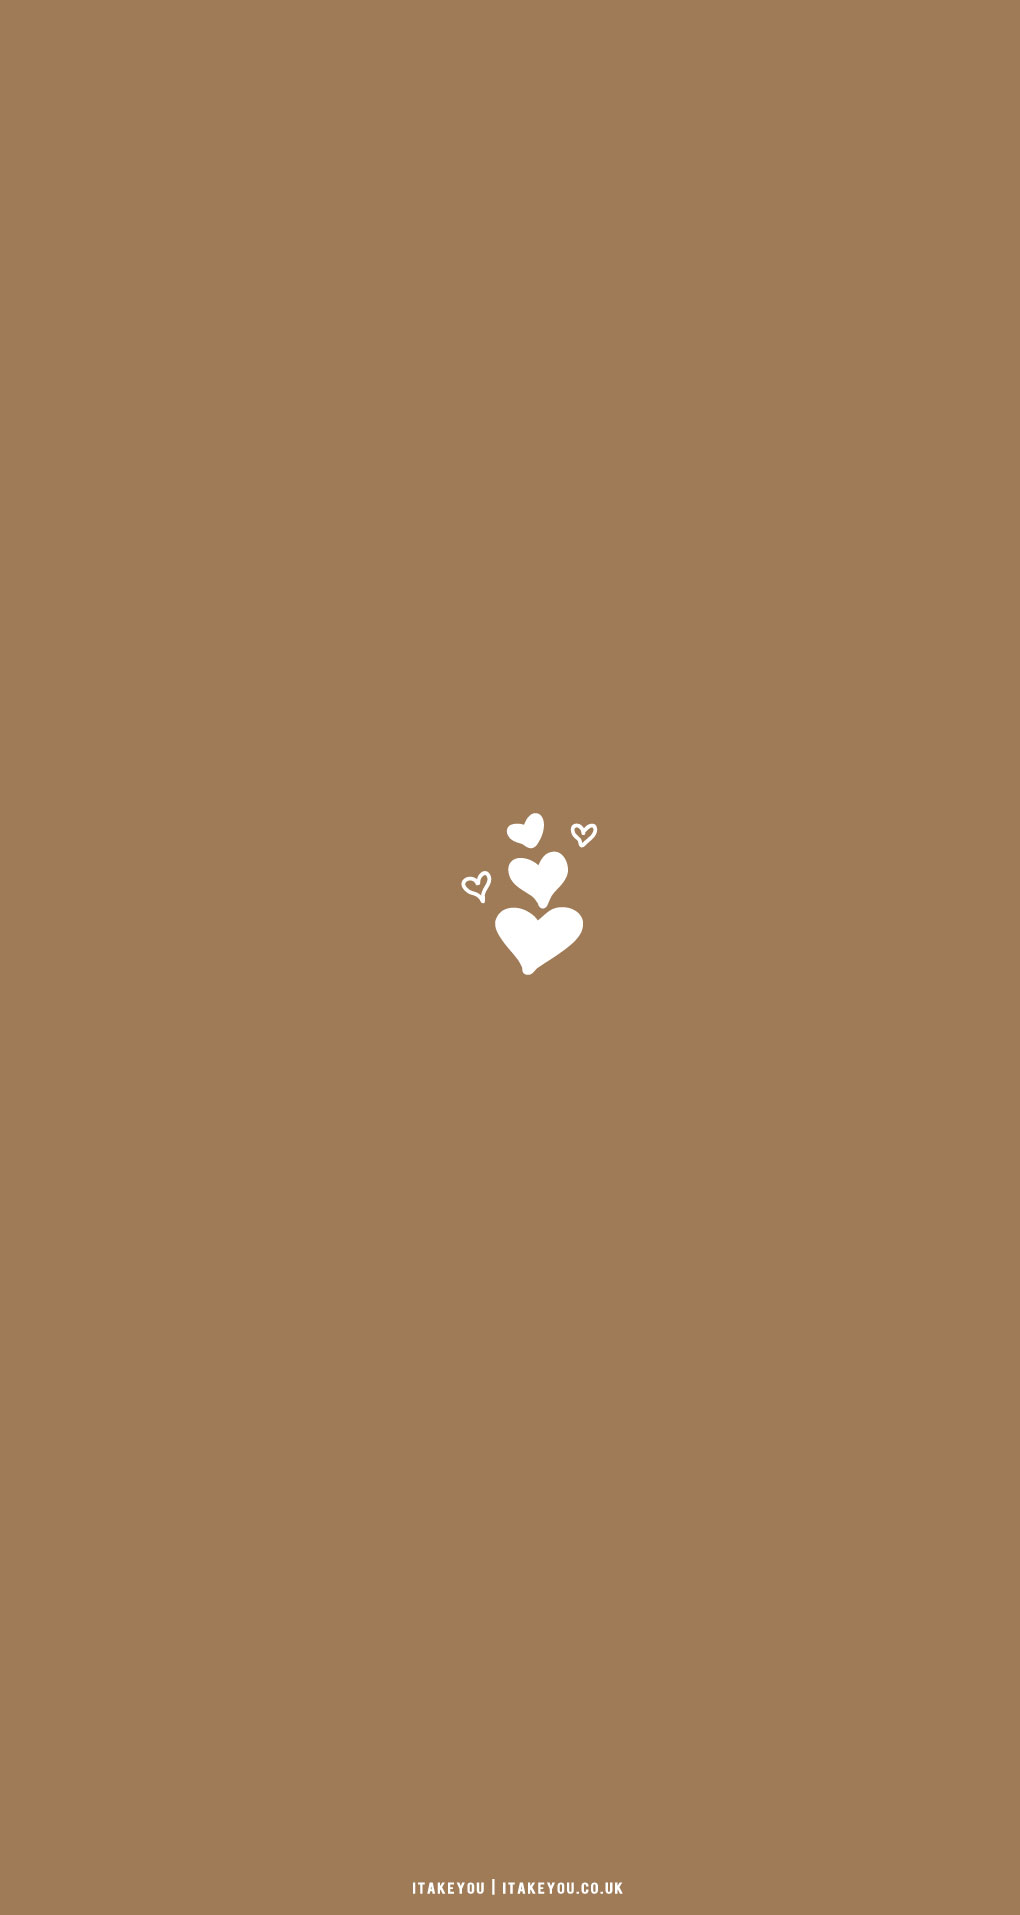 Cute Brown Aesthetic Wallpaper for Phone, Lots of Love Aesthetic Wallpaper I Take You. Wedding Readings. Wedding Ideas